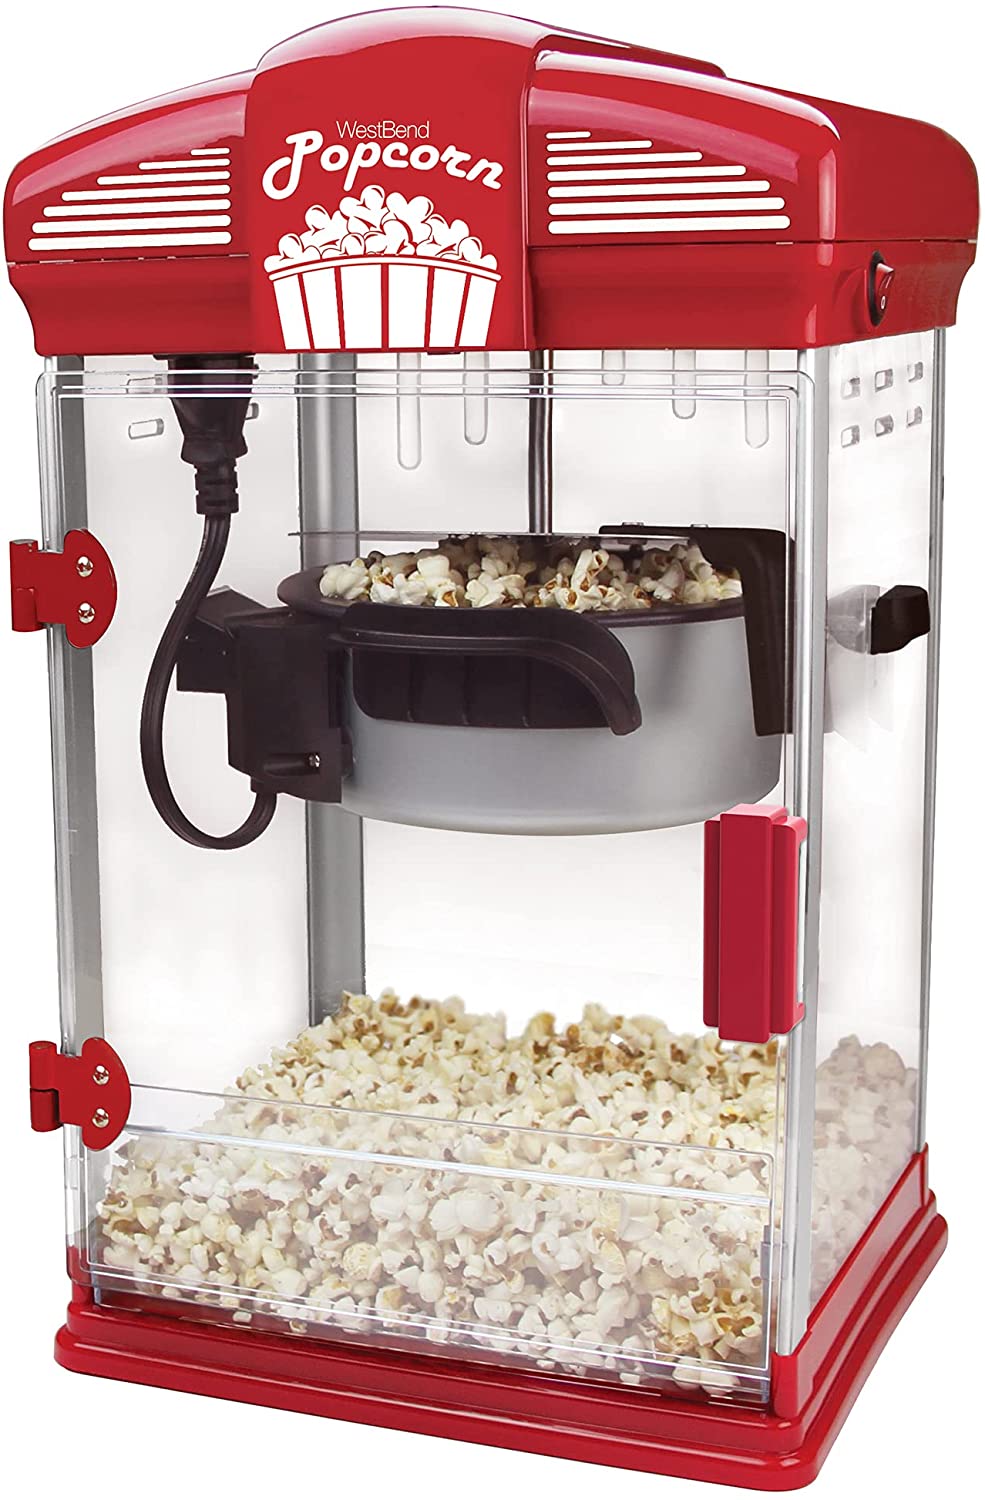 Hot Oil Theater Popcorn Popcorn Machine Provides Fast, Durable and Easy-to-clean Non-stick Pan, 4 Quart Capacity от DHgate WW